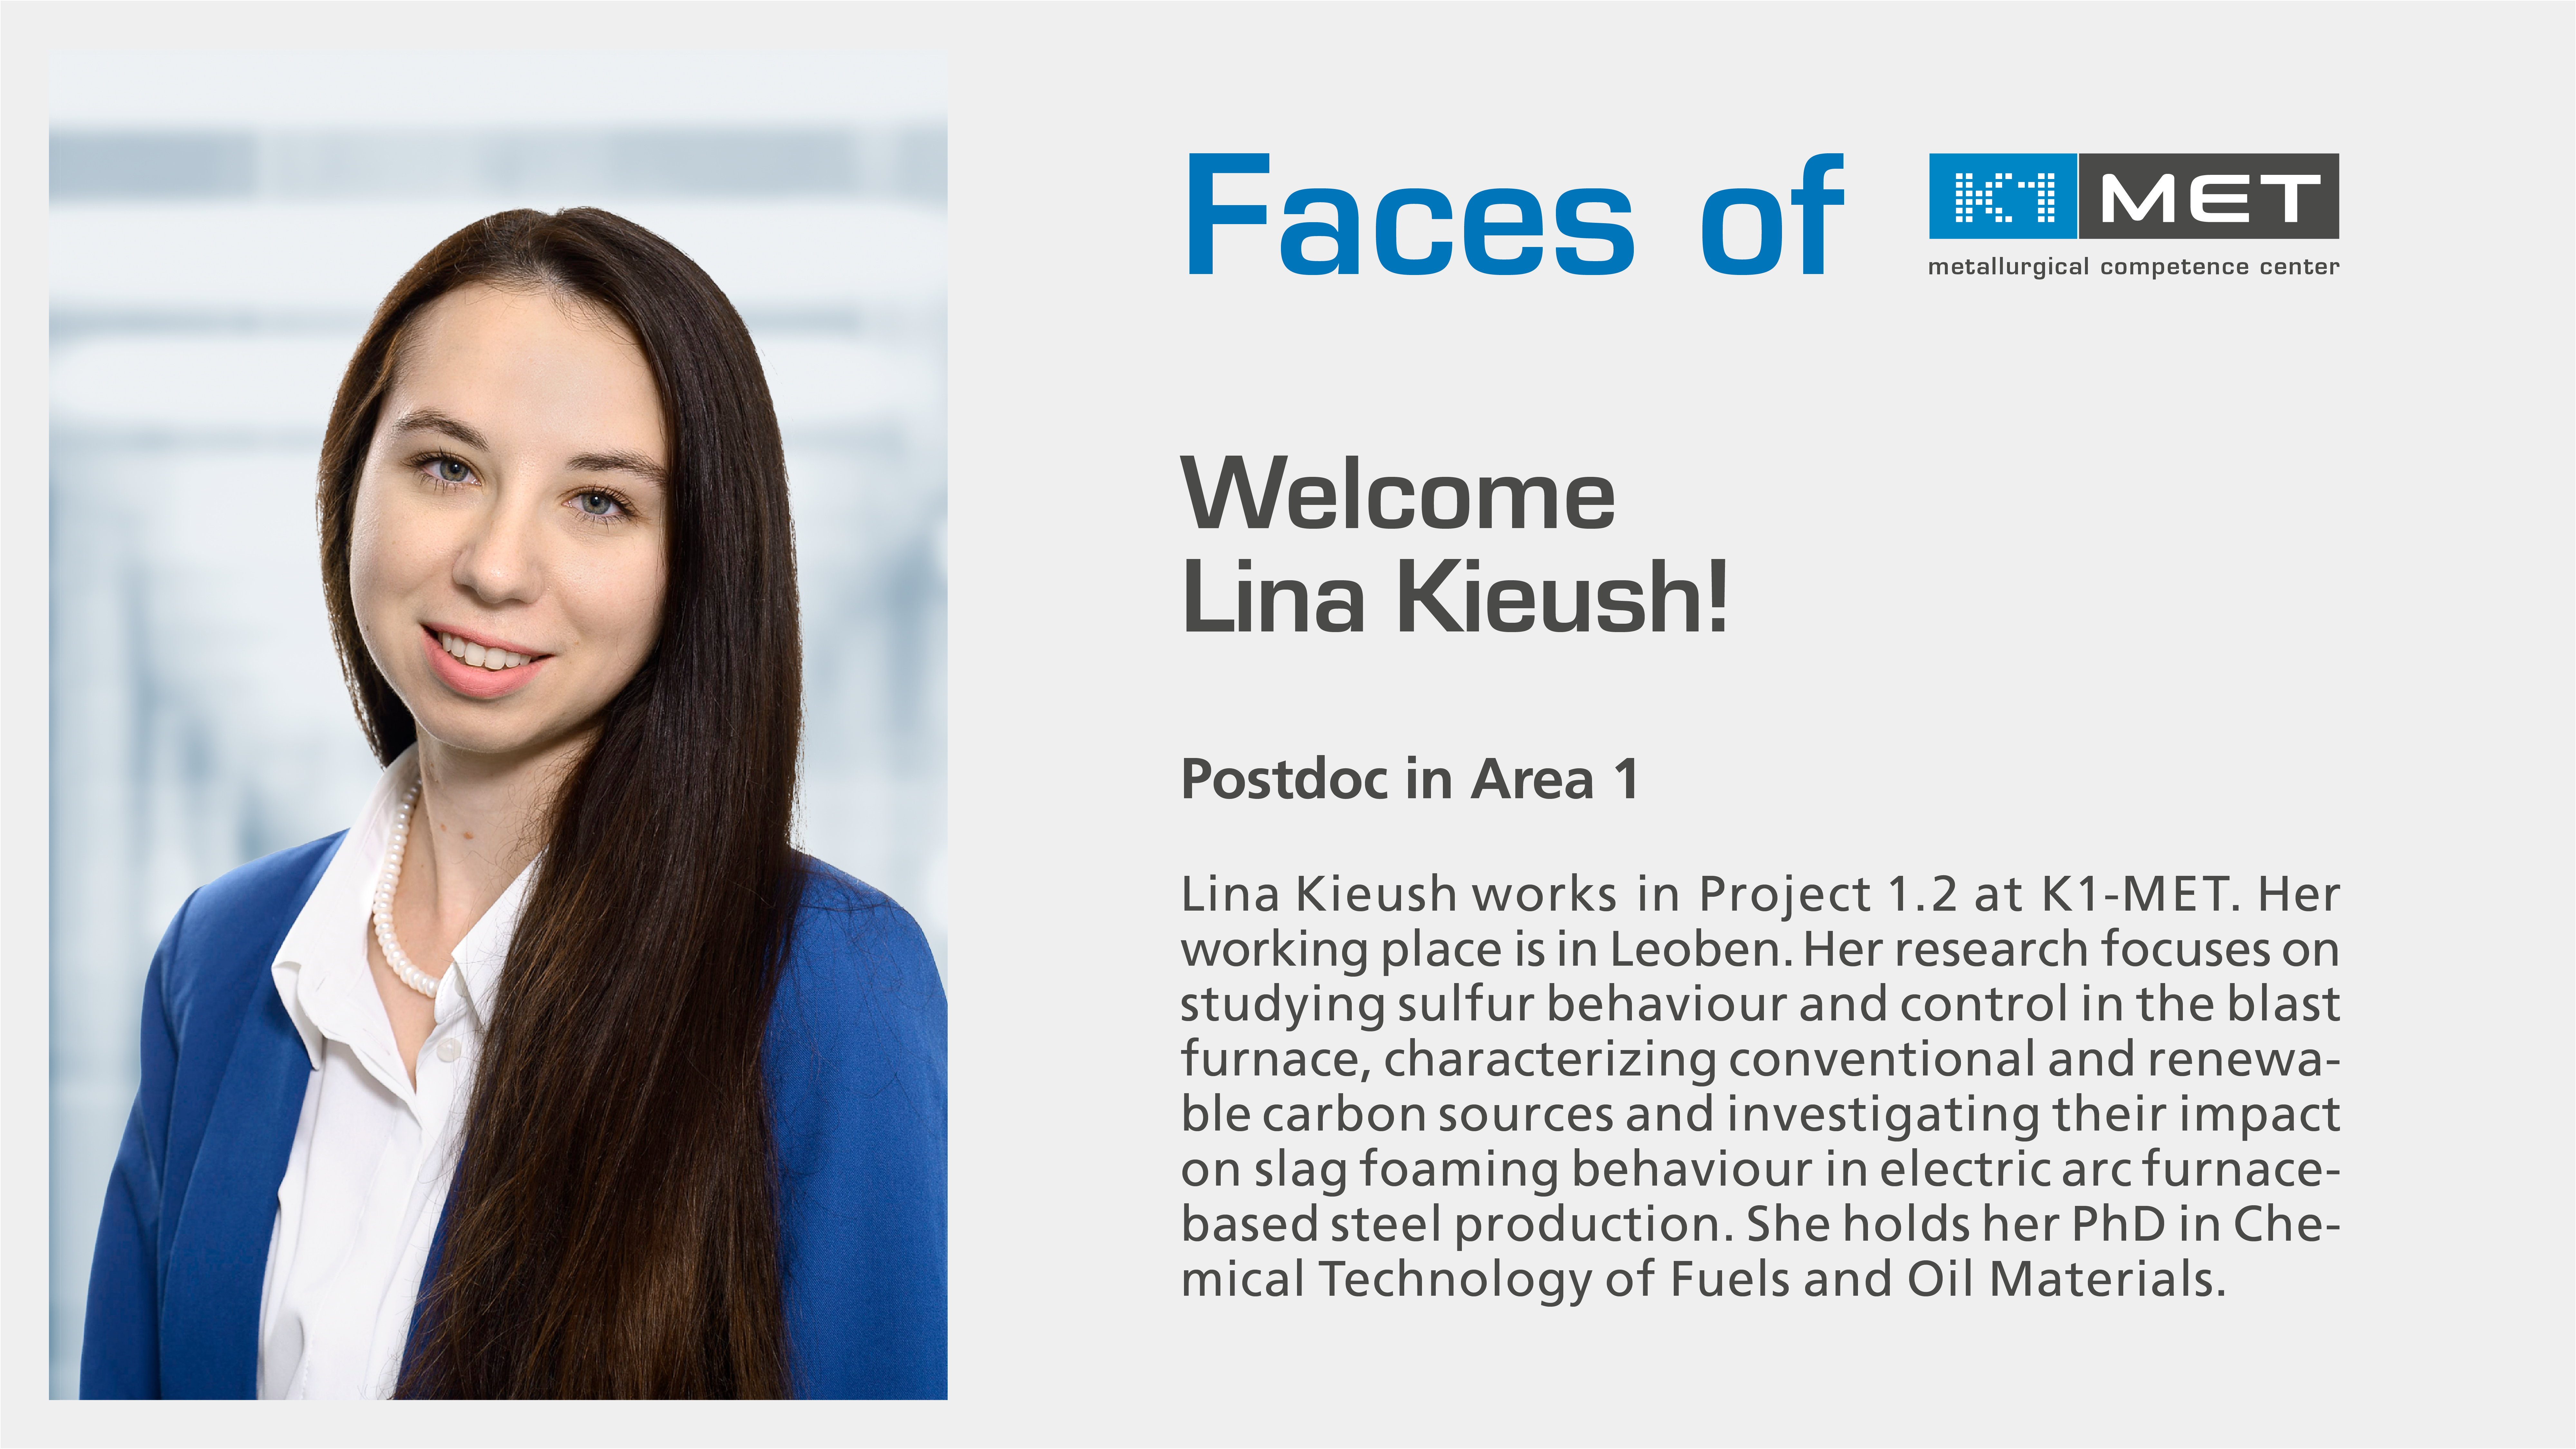 Faces of K1-MET, Welcome Lina Kieush! Postdoc in Area 1; Lina Kieush works in Project 1.2 at K1-MET. Her working place is in Leoben. Her research focuses on studying sulfur behaviour and control in the blast furnace, characterizing conventional and renewable carbon sources, and investigating their impact on slag foaming behavior in electric arc furnace-based steel production. Lina holds her PhD in Chemical Technology of Fuels and Oil Materials.